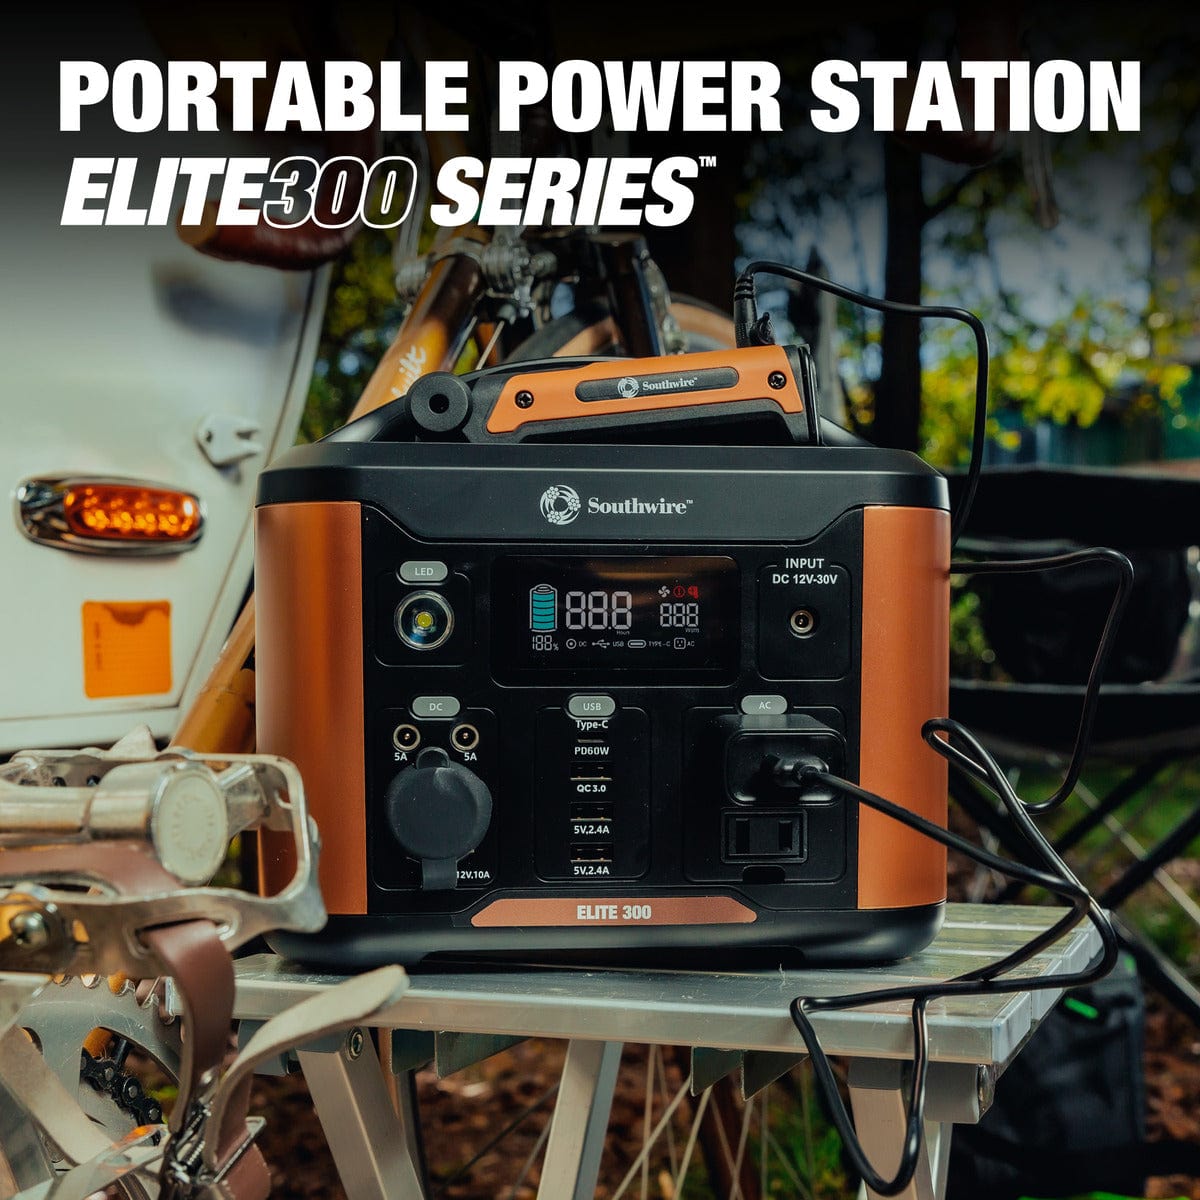 Southwire Power Supply Southwire Elite 300 Series™ Portable Power Station - 53251